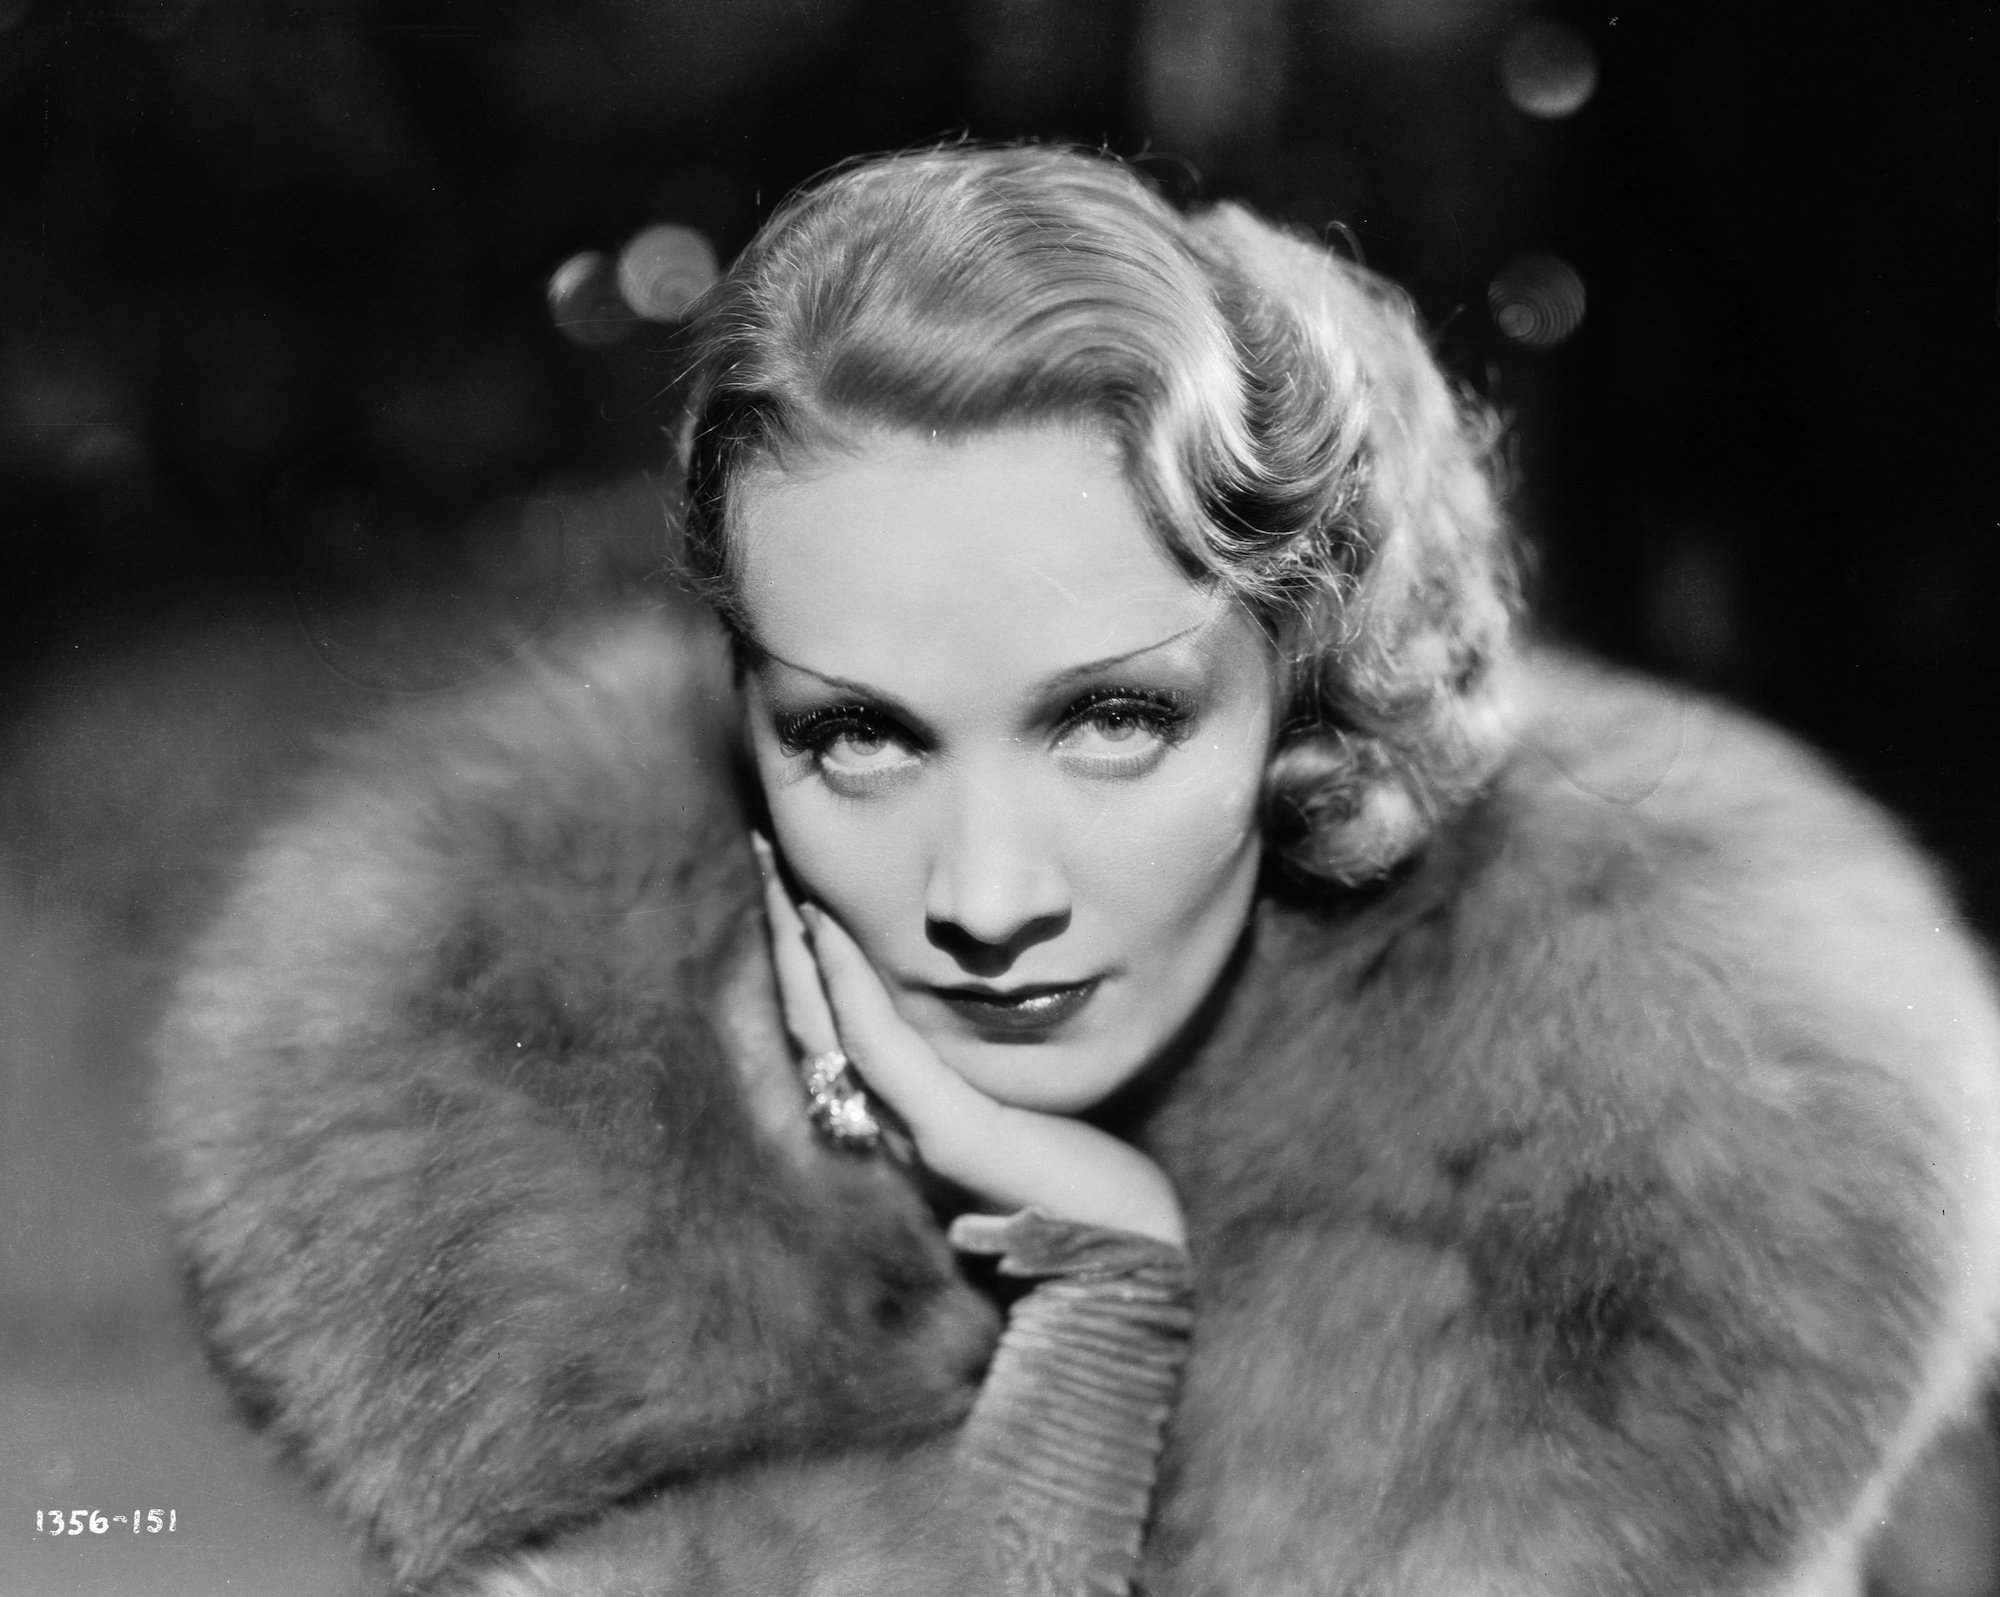 Marlene Dietrich looking up at the camera with a large fur collar, in black and white